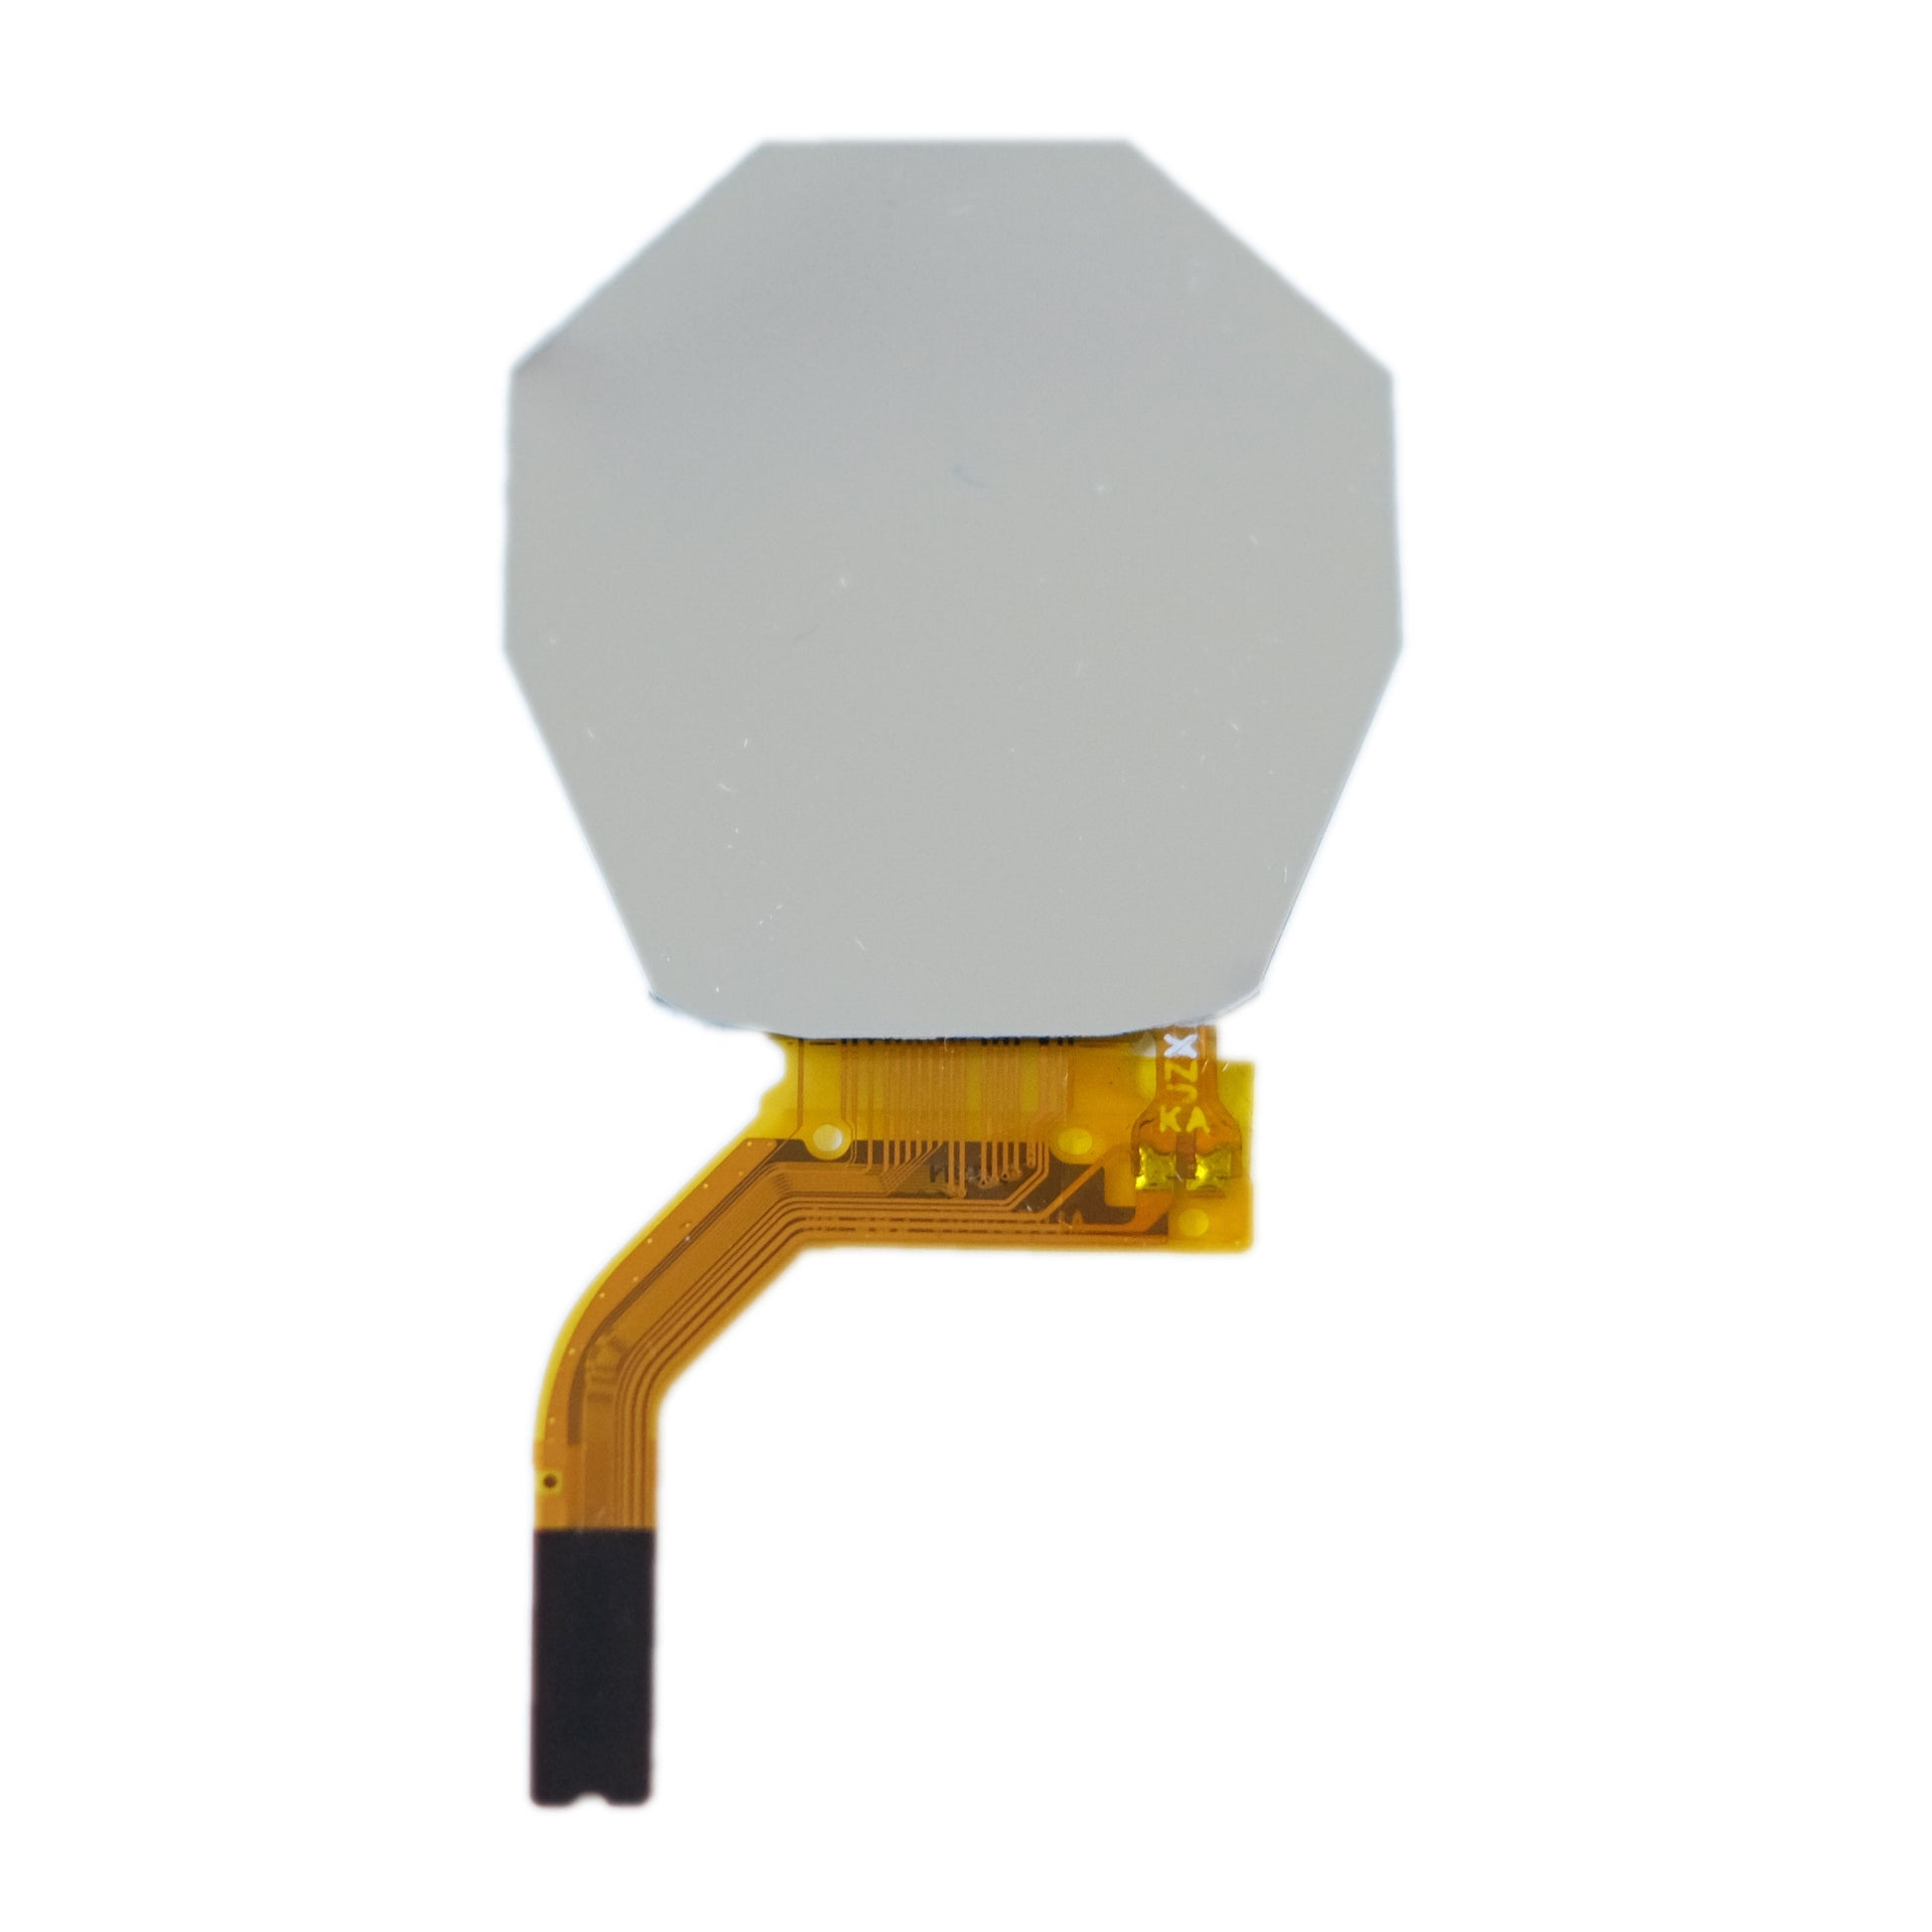 Back of 0.99-inch TFT Round Display Panel